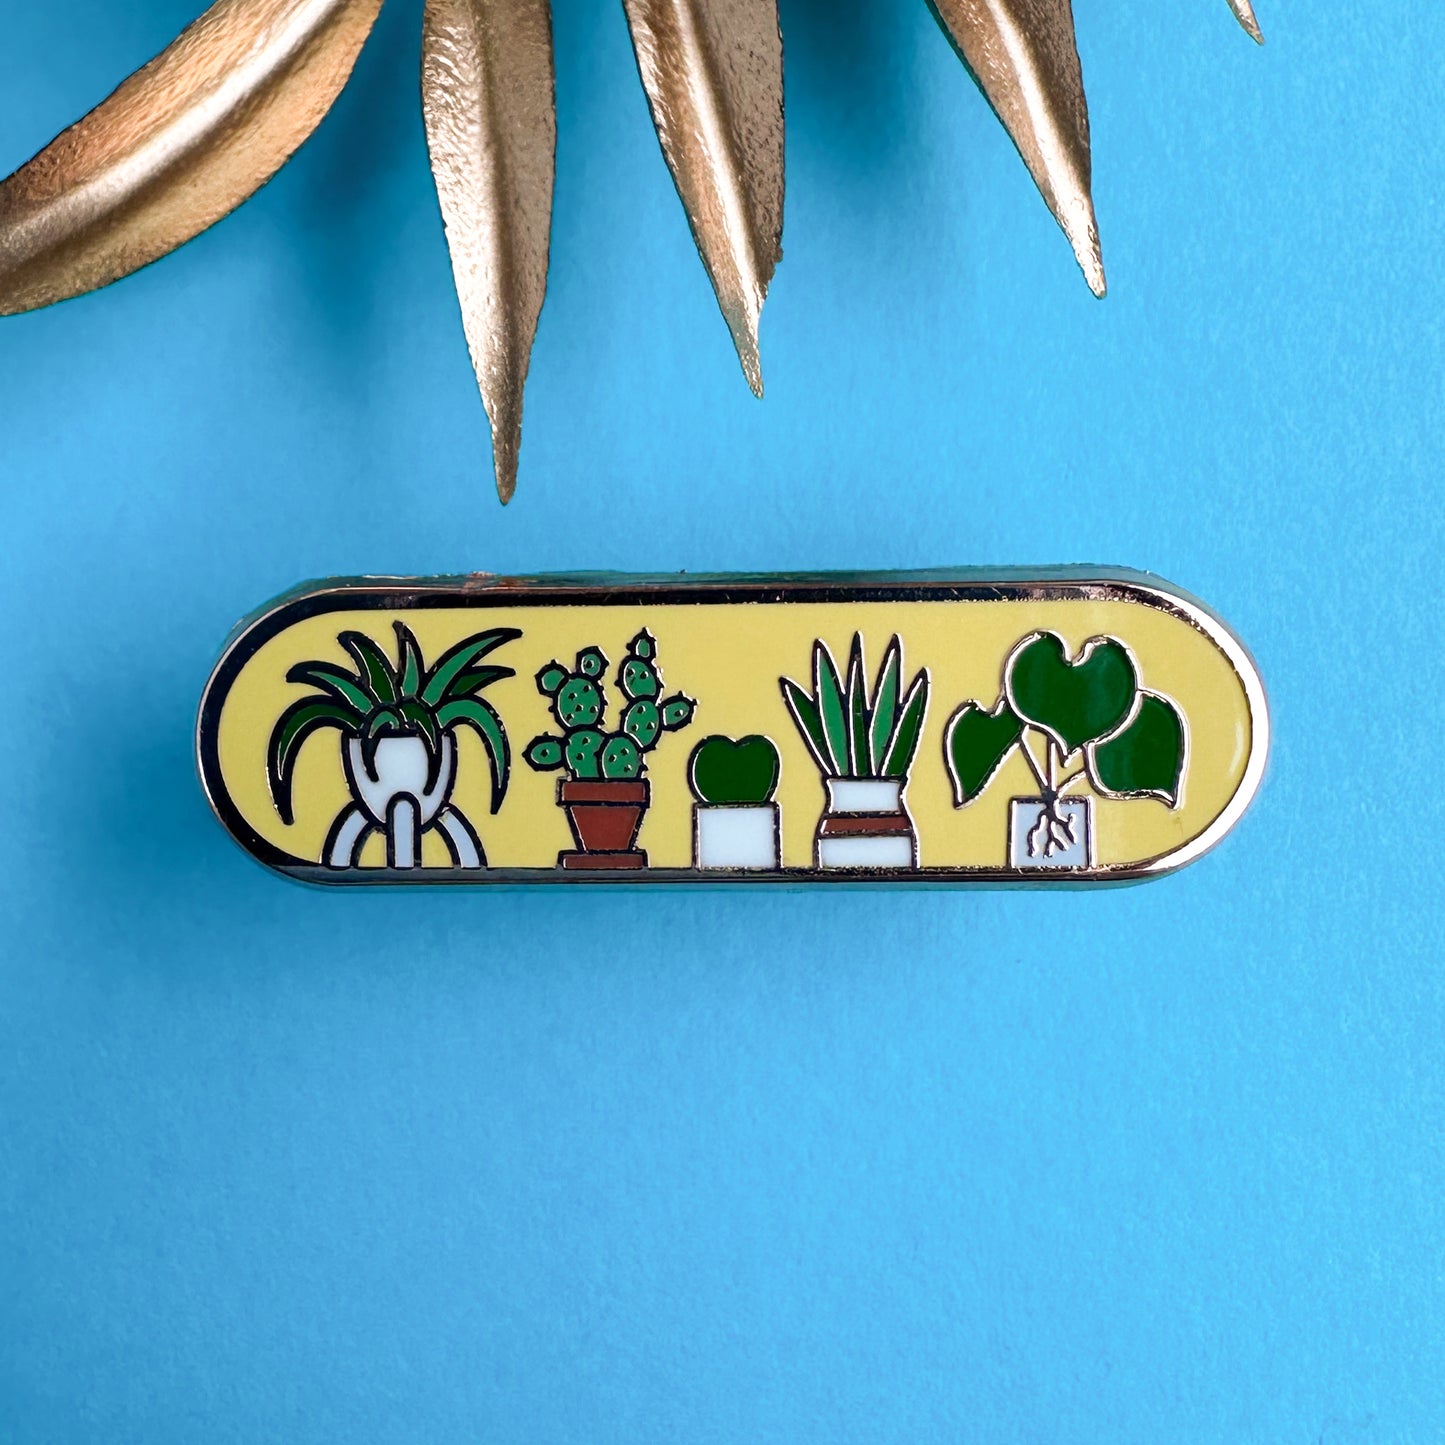 An oval shaped pin with illustrations of cute house plants like a cactus, spider plant, Hoya, and snake plant on it. The pin is on a blue background with some gold leaves in the background. 